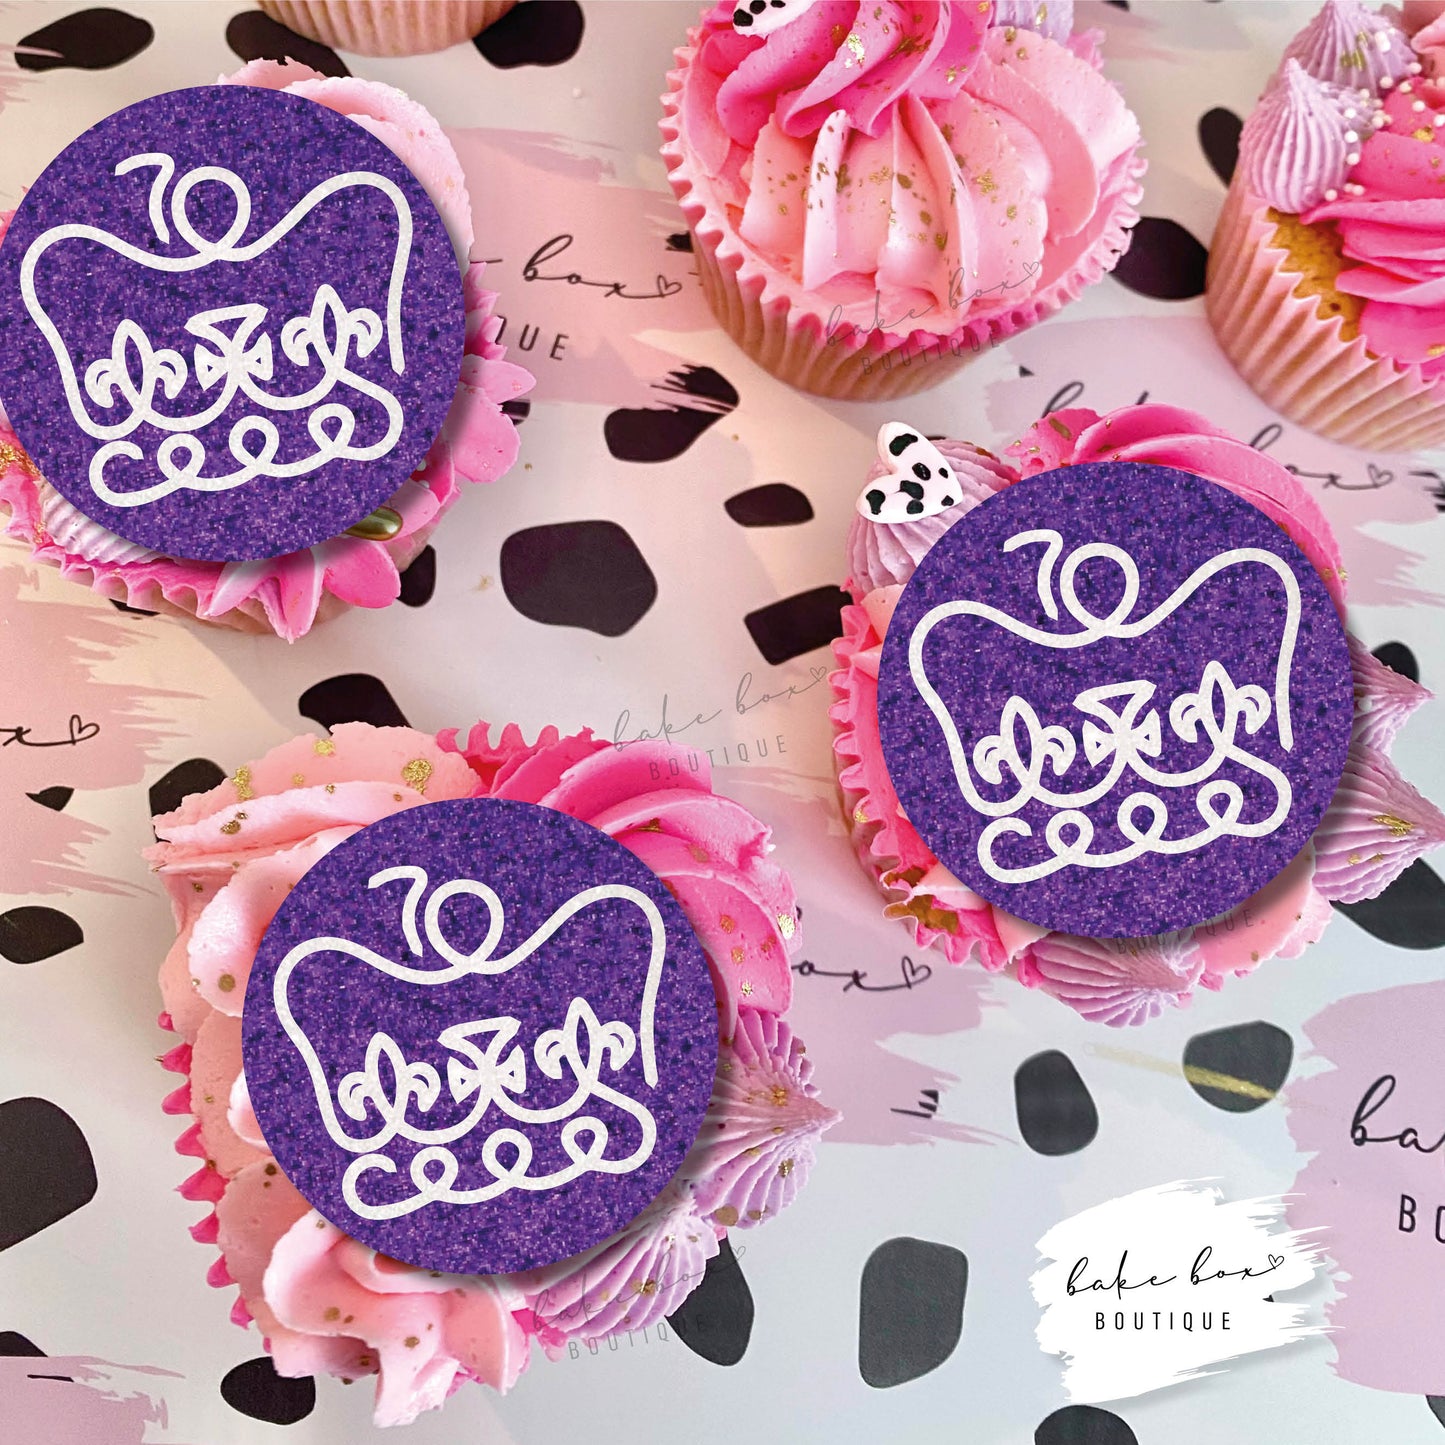 THE QUEENS PLATINUM JUBILEE 2022 - CUPCAKE TOPPERS